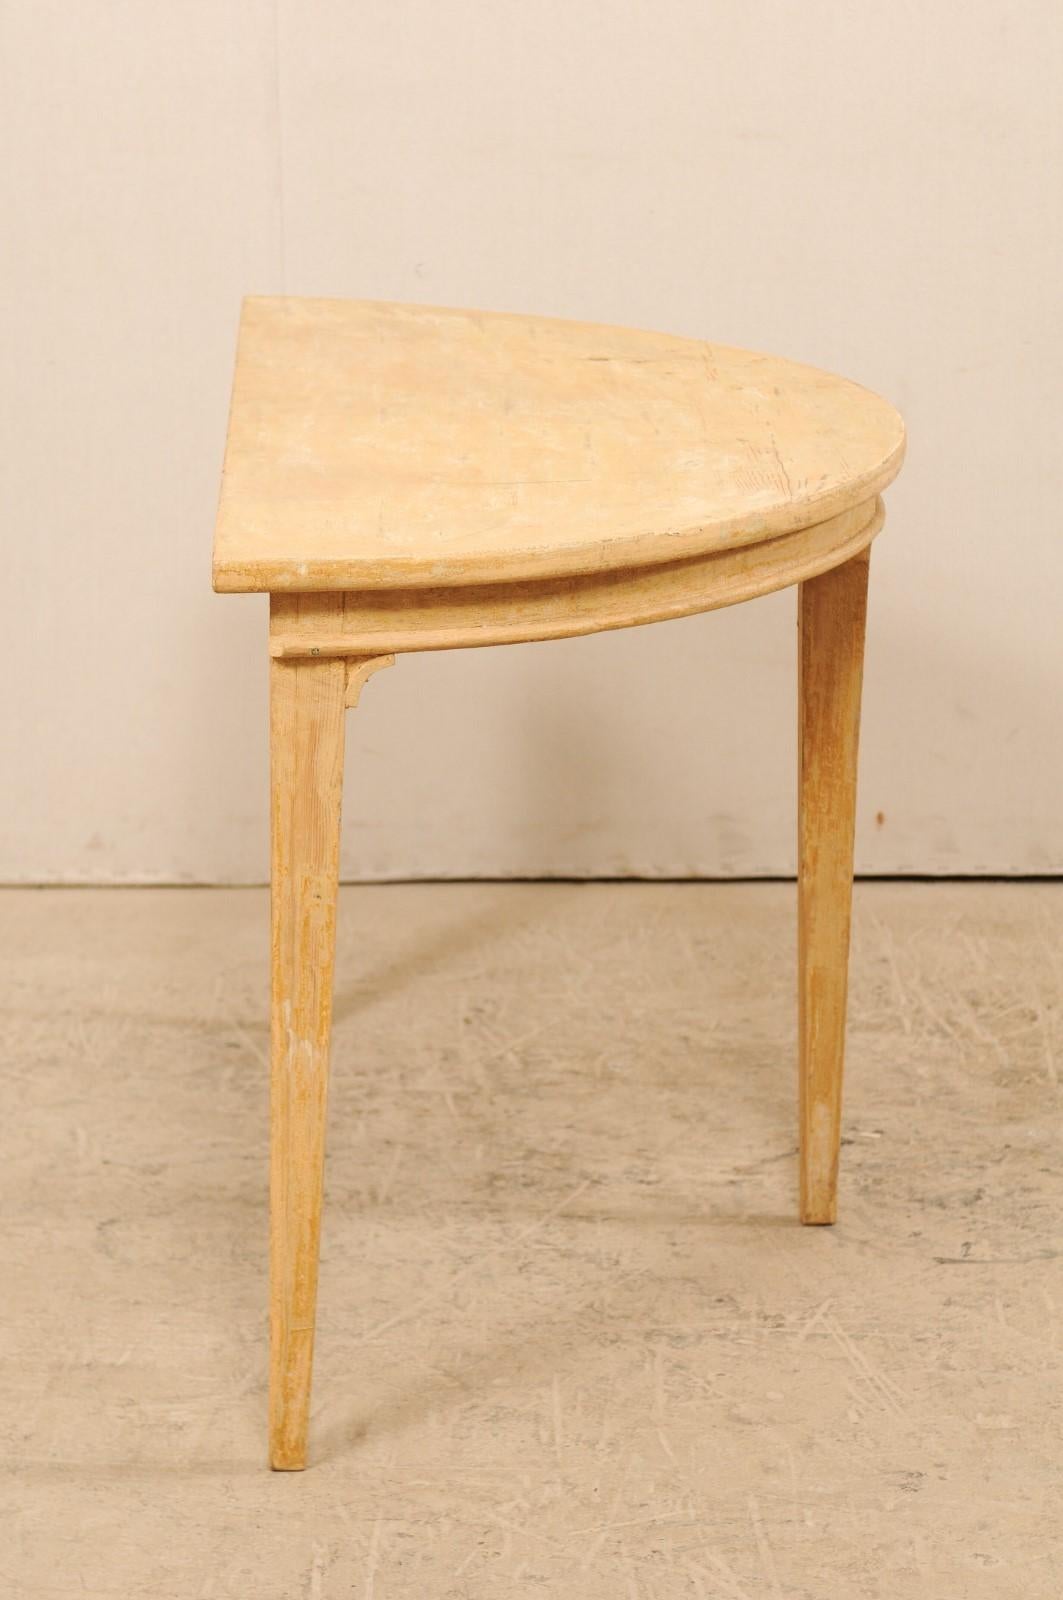 Single Swedish Demilune Light Wood Table from the 19th Century 1